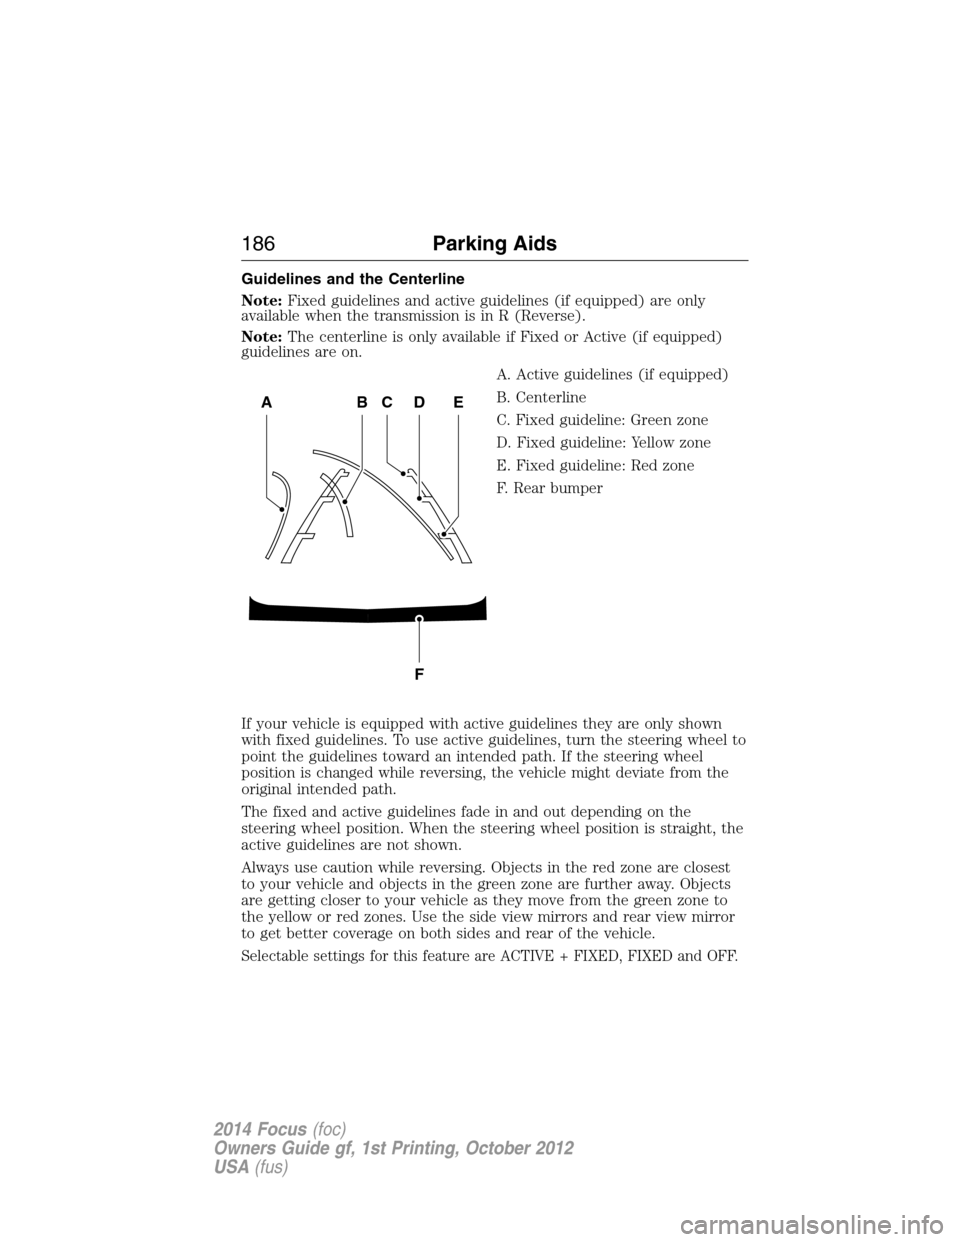 FORD FOCUS 2014 3.G Owners Manual Guidelines and the Centerline
Note:Fixed guidelines and active guidelines (if equipped) are only
available when the transmission is in R (Reverse).
Note:The centerline is only available if Fixed or Ac